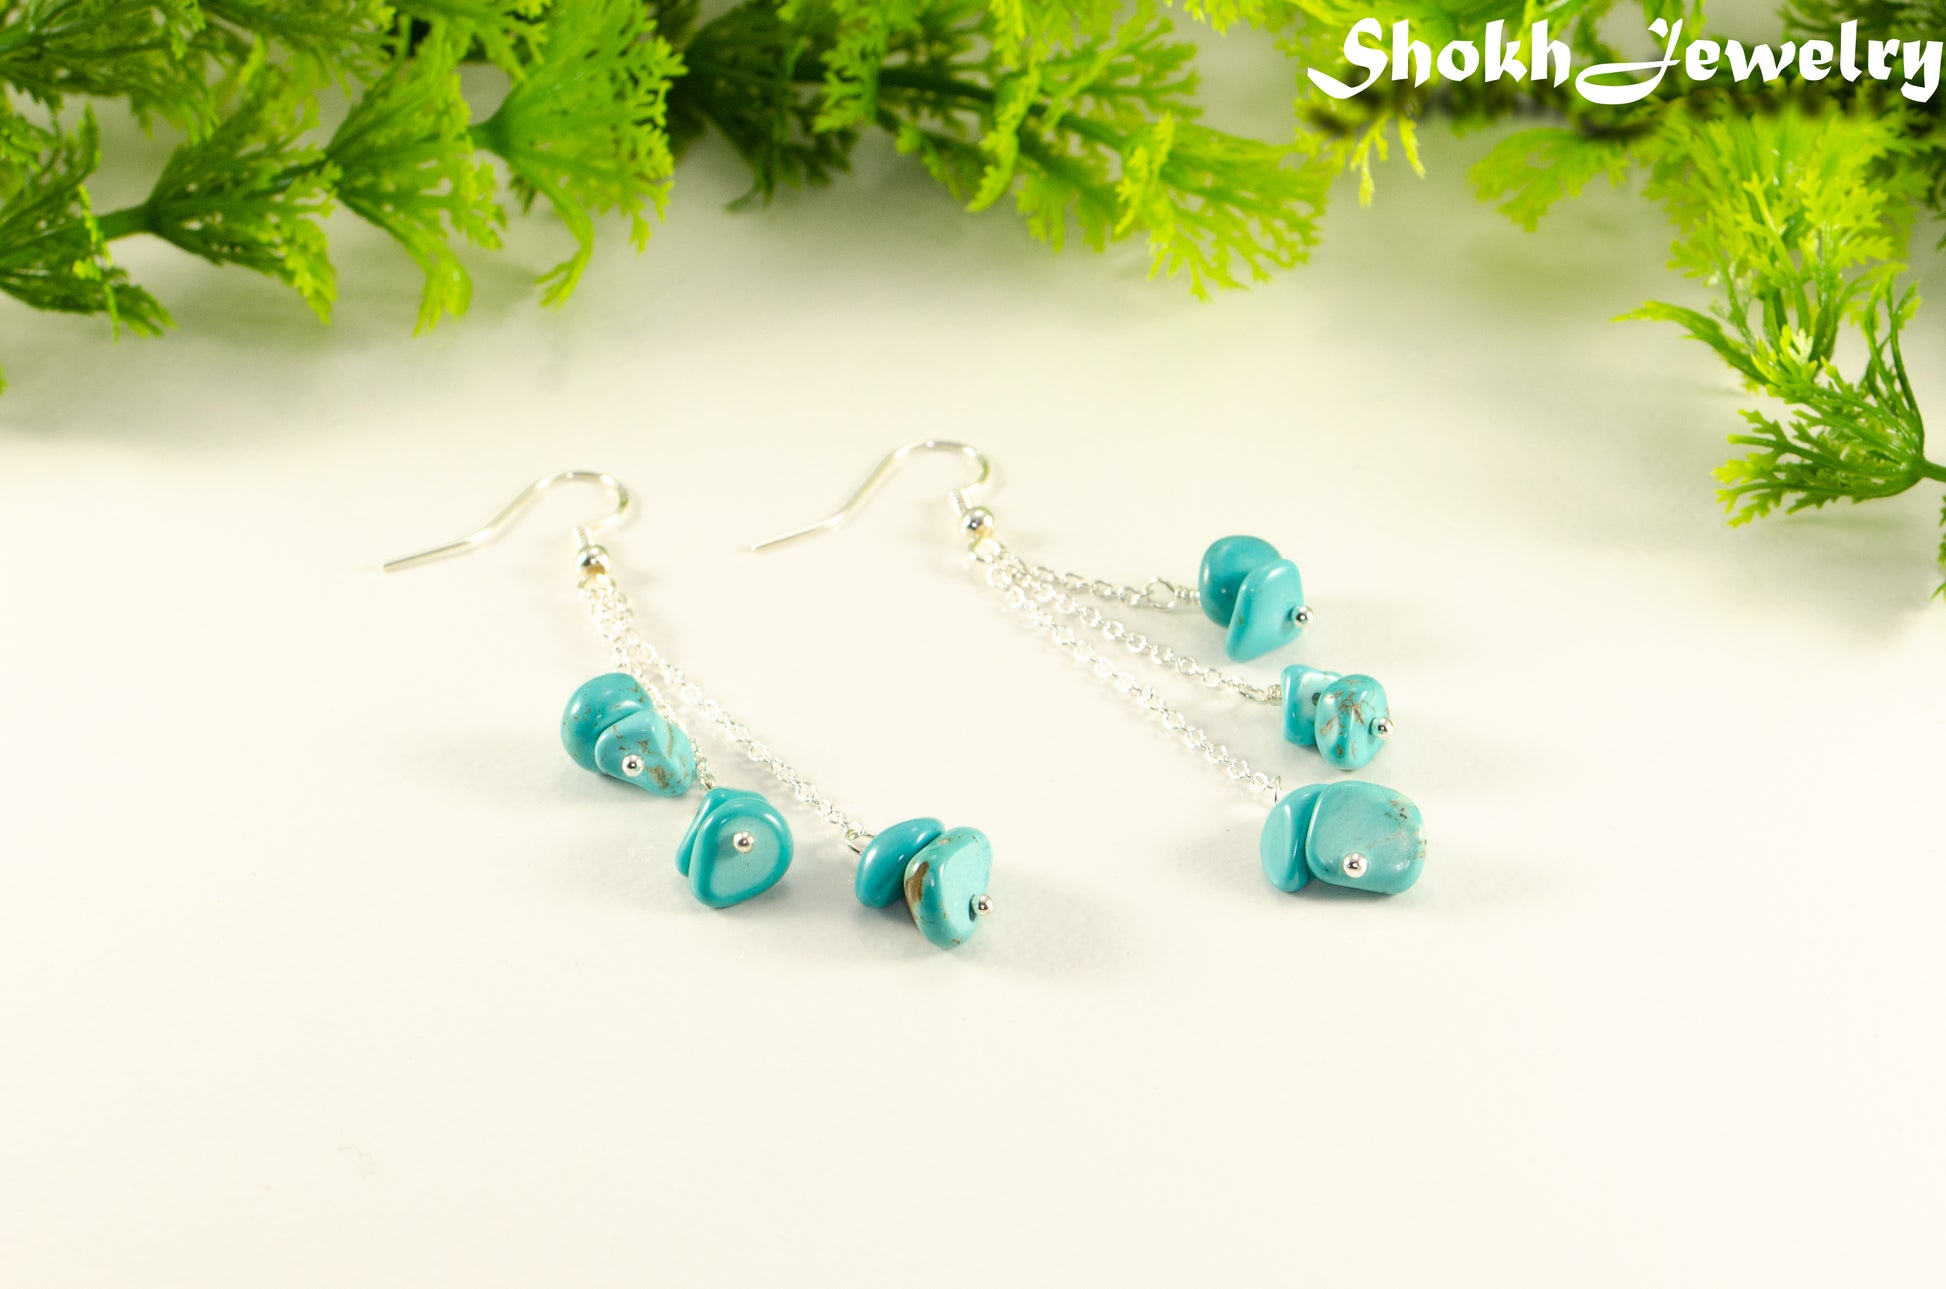 Long Silver Plated Chain and Turquoise Crystal Chip Earrings.